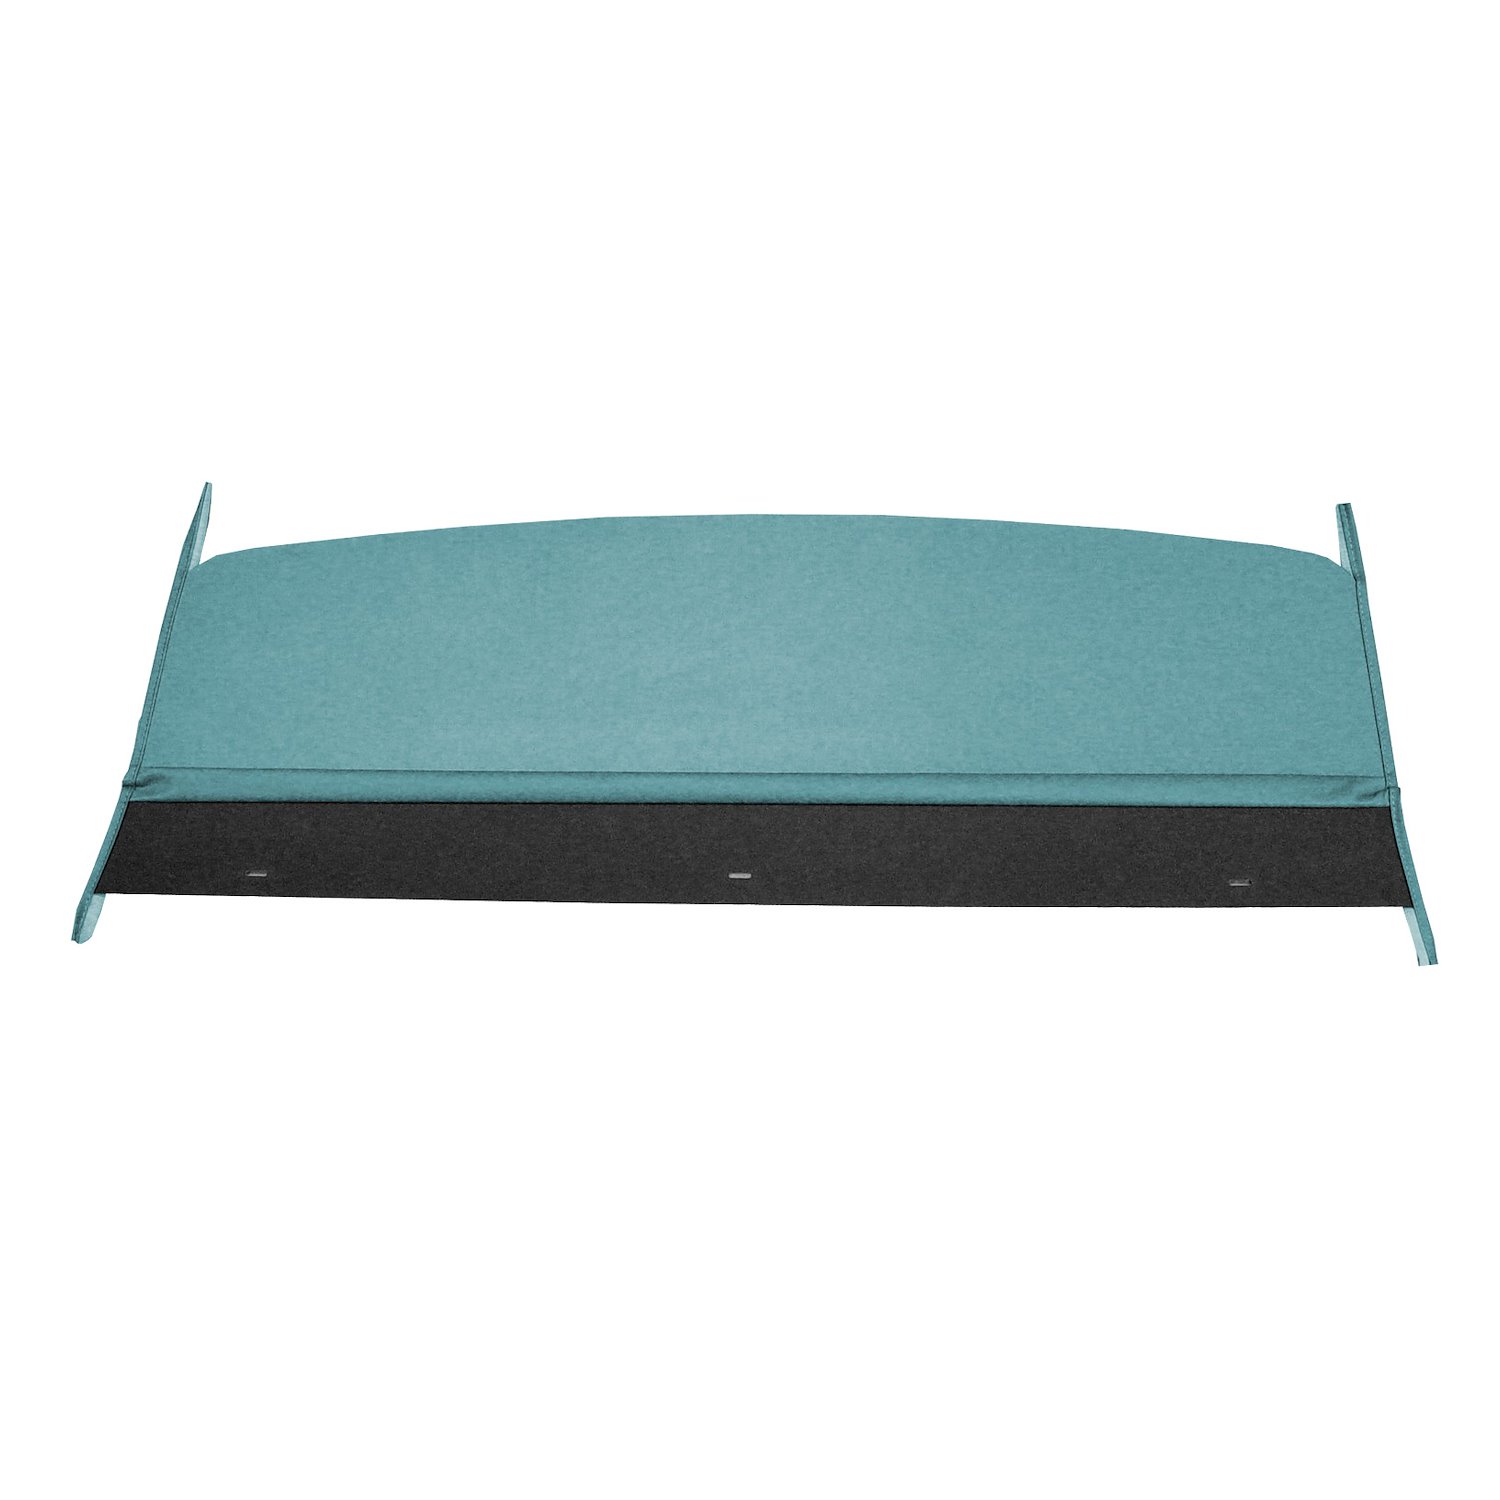 PT63CL406N 63 DART HARDTOP PACKAGE TRAY WITHOUT SPEAKER CUTS - TURQUOI